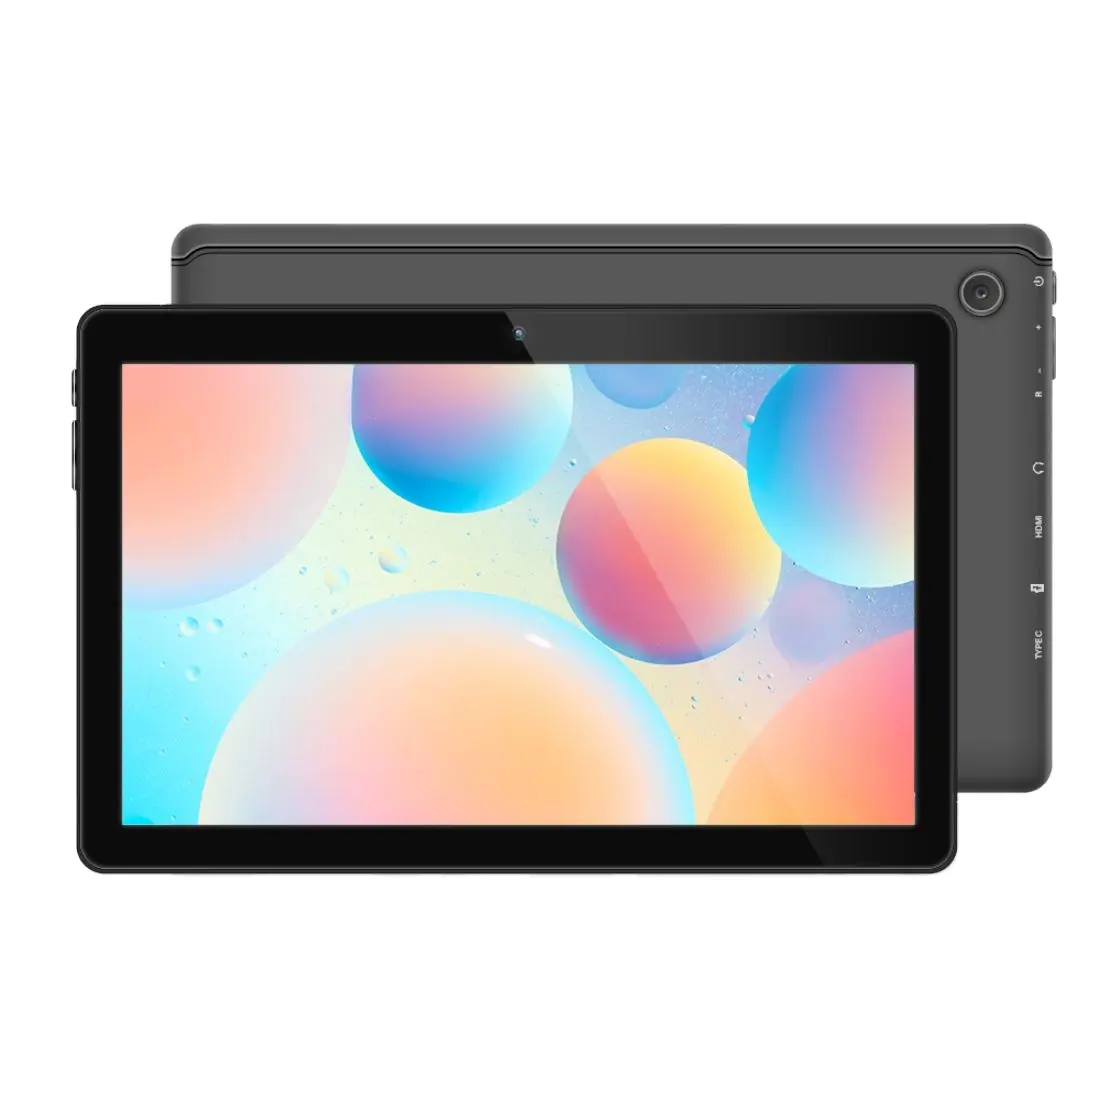 Hot sale tableta pc CIMI 10inch tablet quad core 2GB 32GB touch screen android wifi tablet pc with fast speed